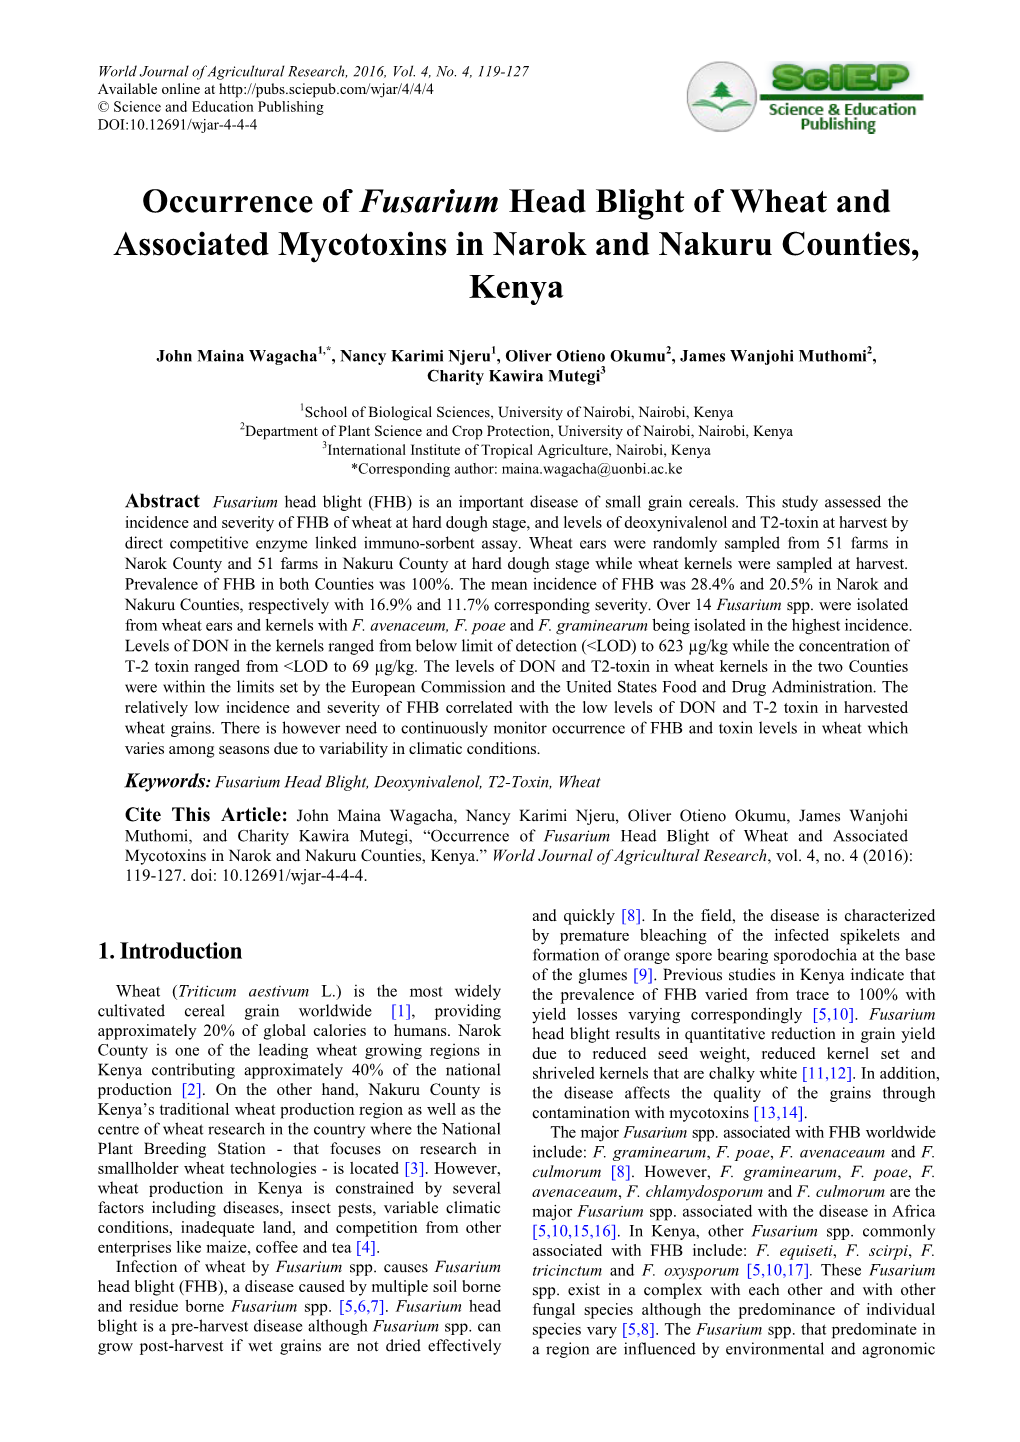 Occurrence of Fusarium Head Blight of Wheat and Associated Mycotoxins in Narok and Nakuru Counties, Kenya